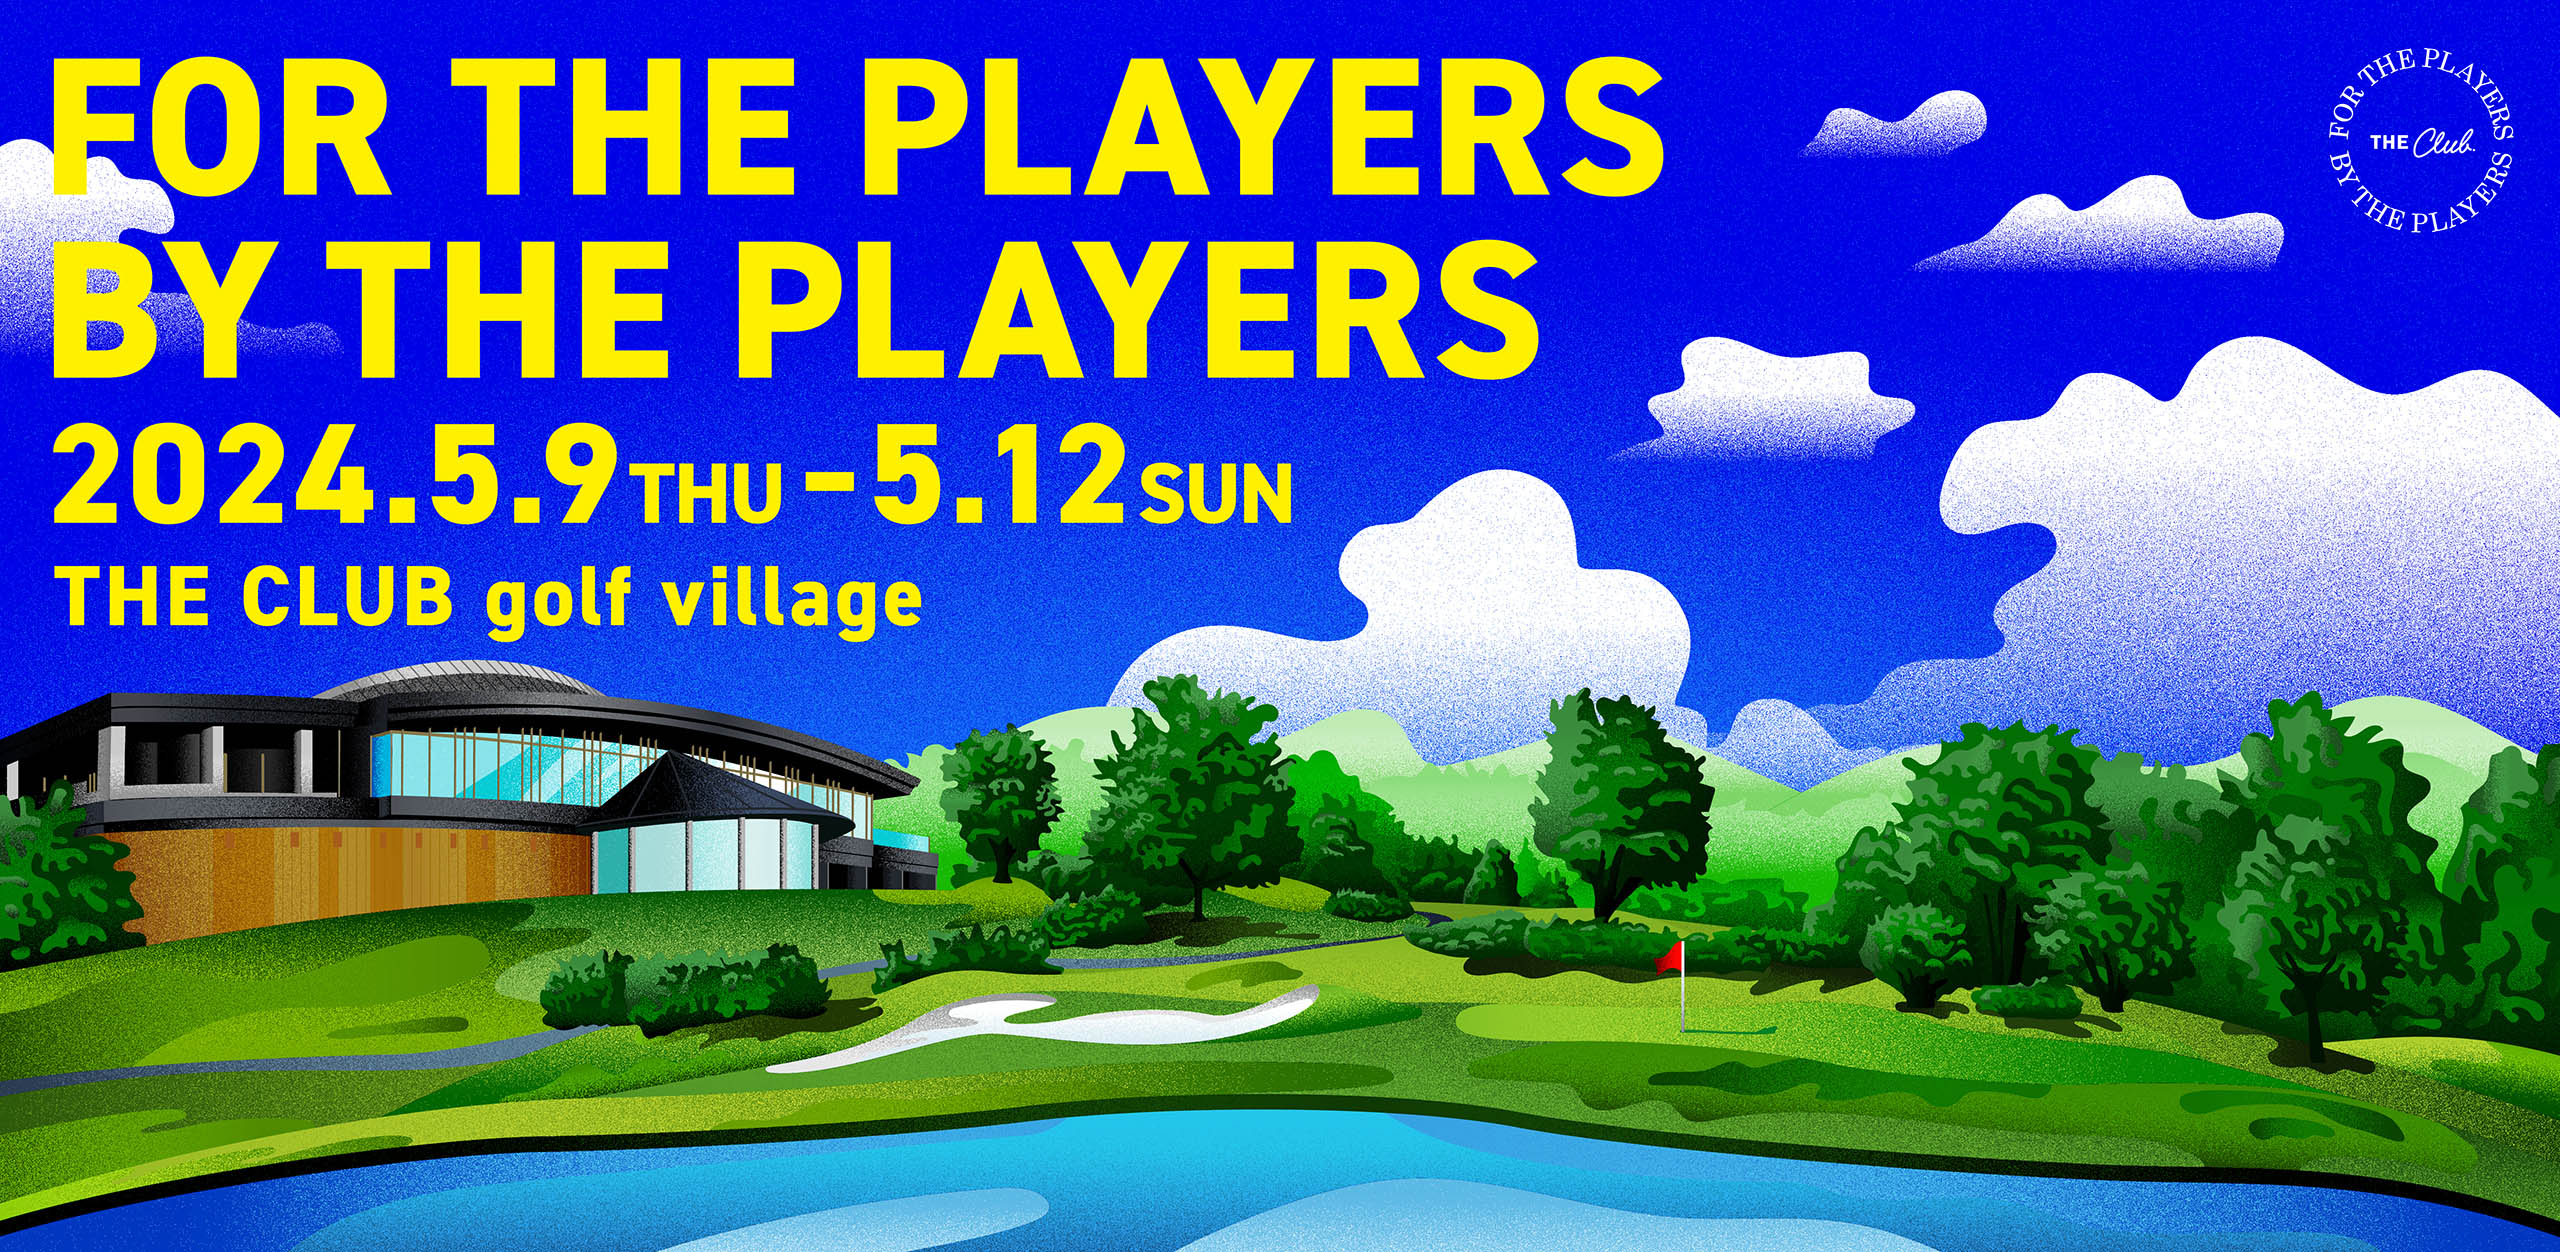 「For The Players By The Players」大会